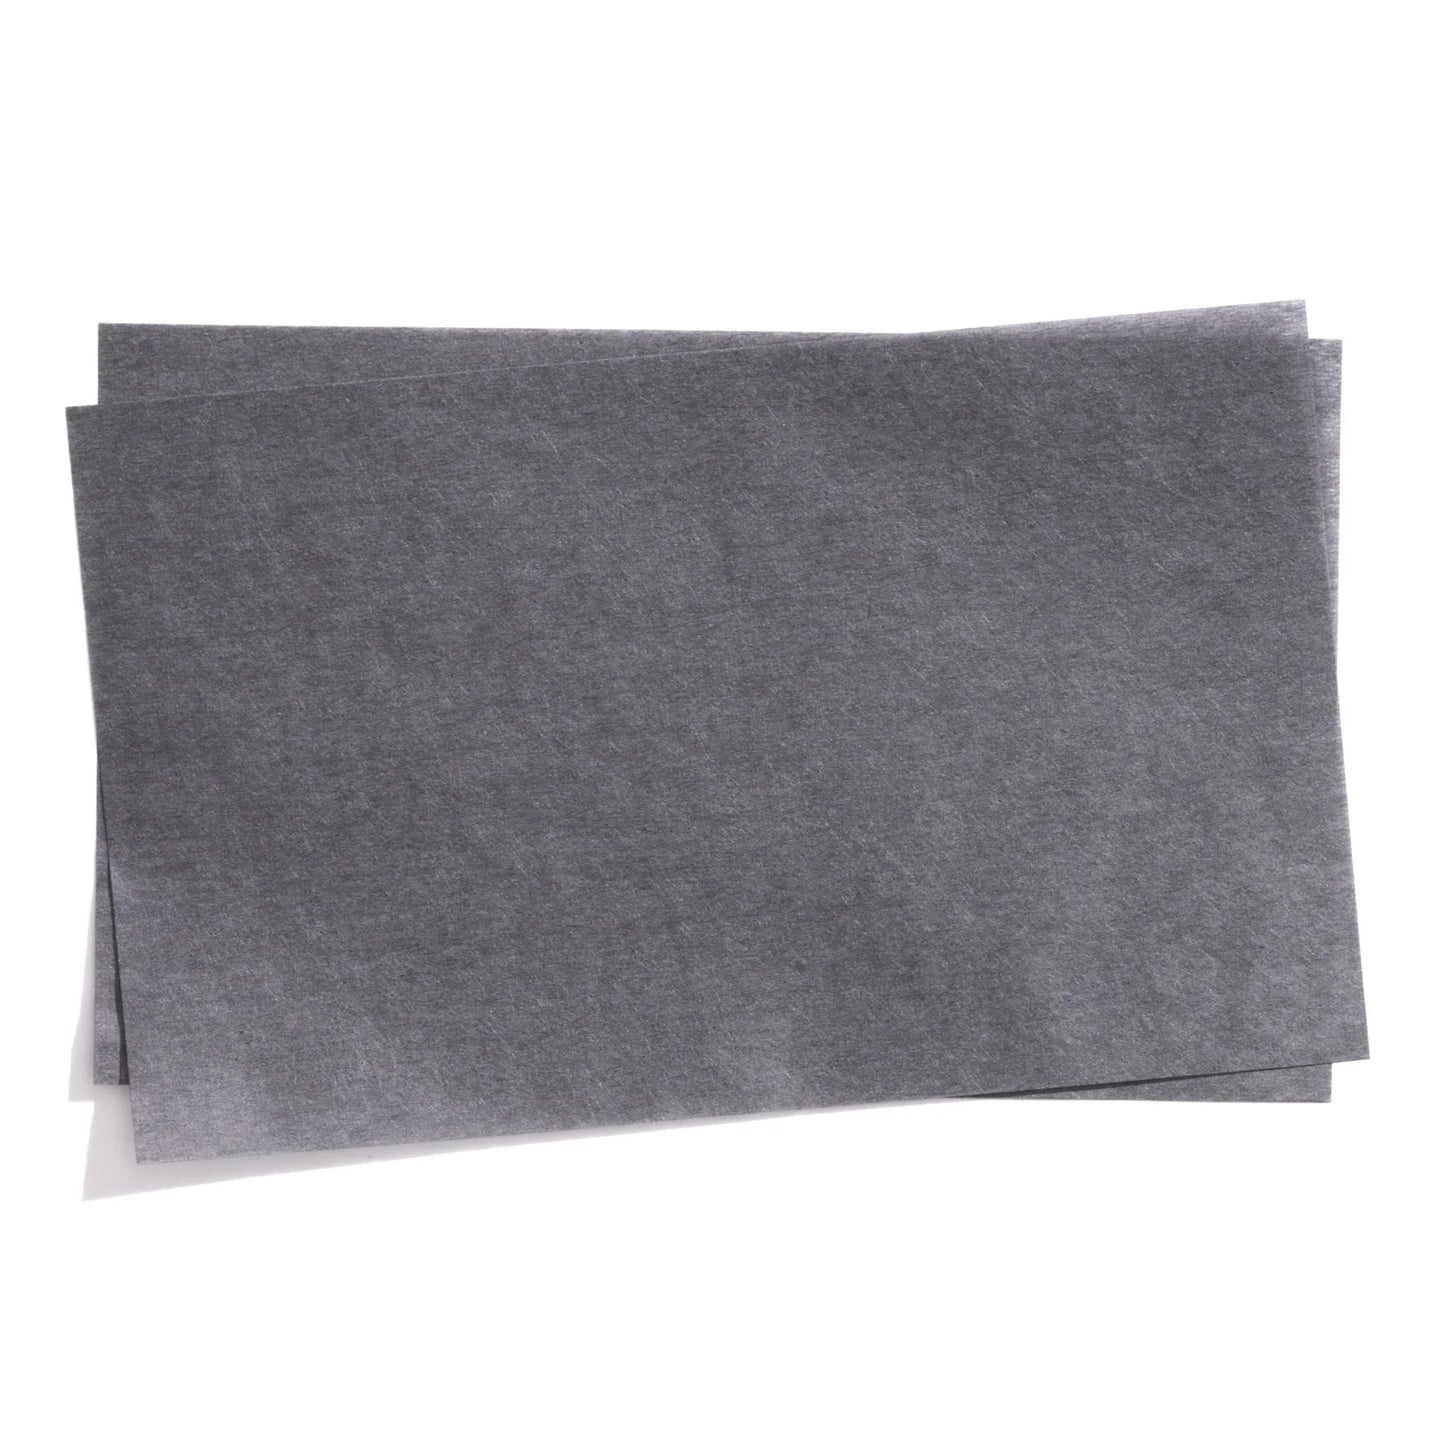 Beauty Creations Oily Who? - Charcoal Blotting Paper 3pc Bundle